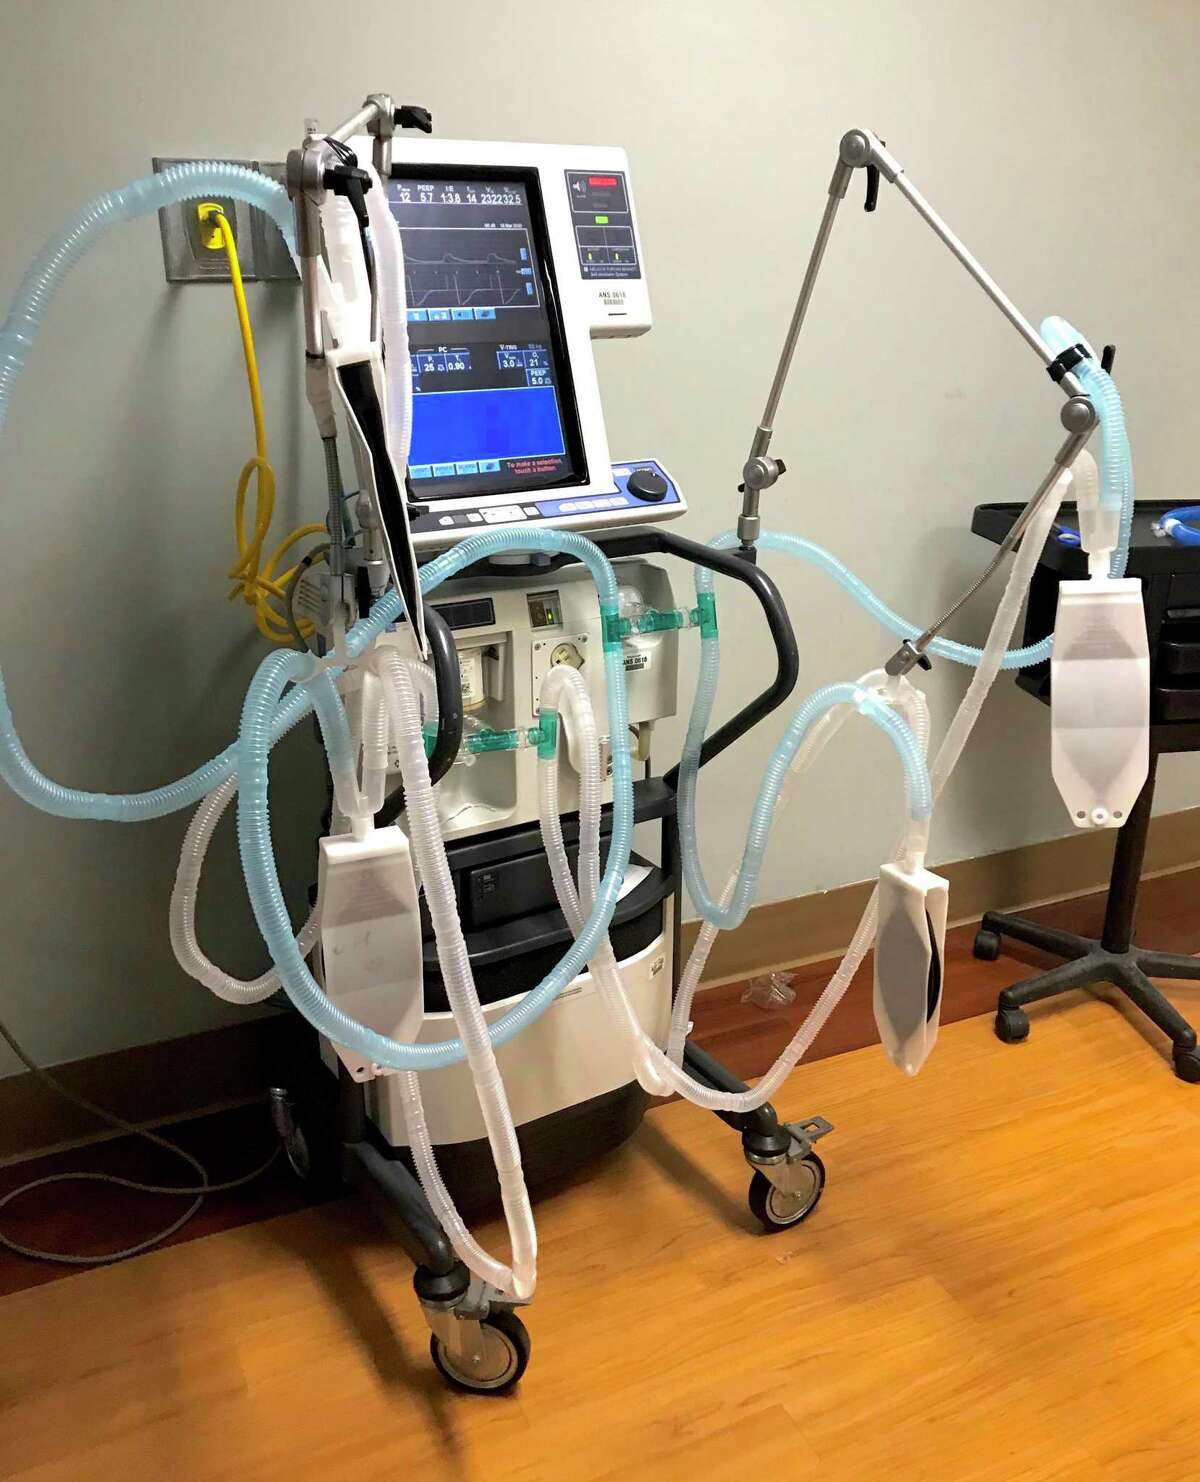 A ventilator at Manchester Memorial Hospital was retrofitted to respirate four patients at a time, by Dr. Saud Anwar, a state senator from South Windsor, and Marvin Bristol, a cardiopulmonary educator. The technique was first published by two doctors in 2006 and has not been tested on humans but could help ease the critical shortage of ventilators in the coronavirus crisis with COVID-19 patients.